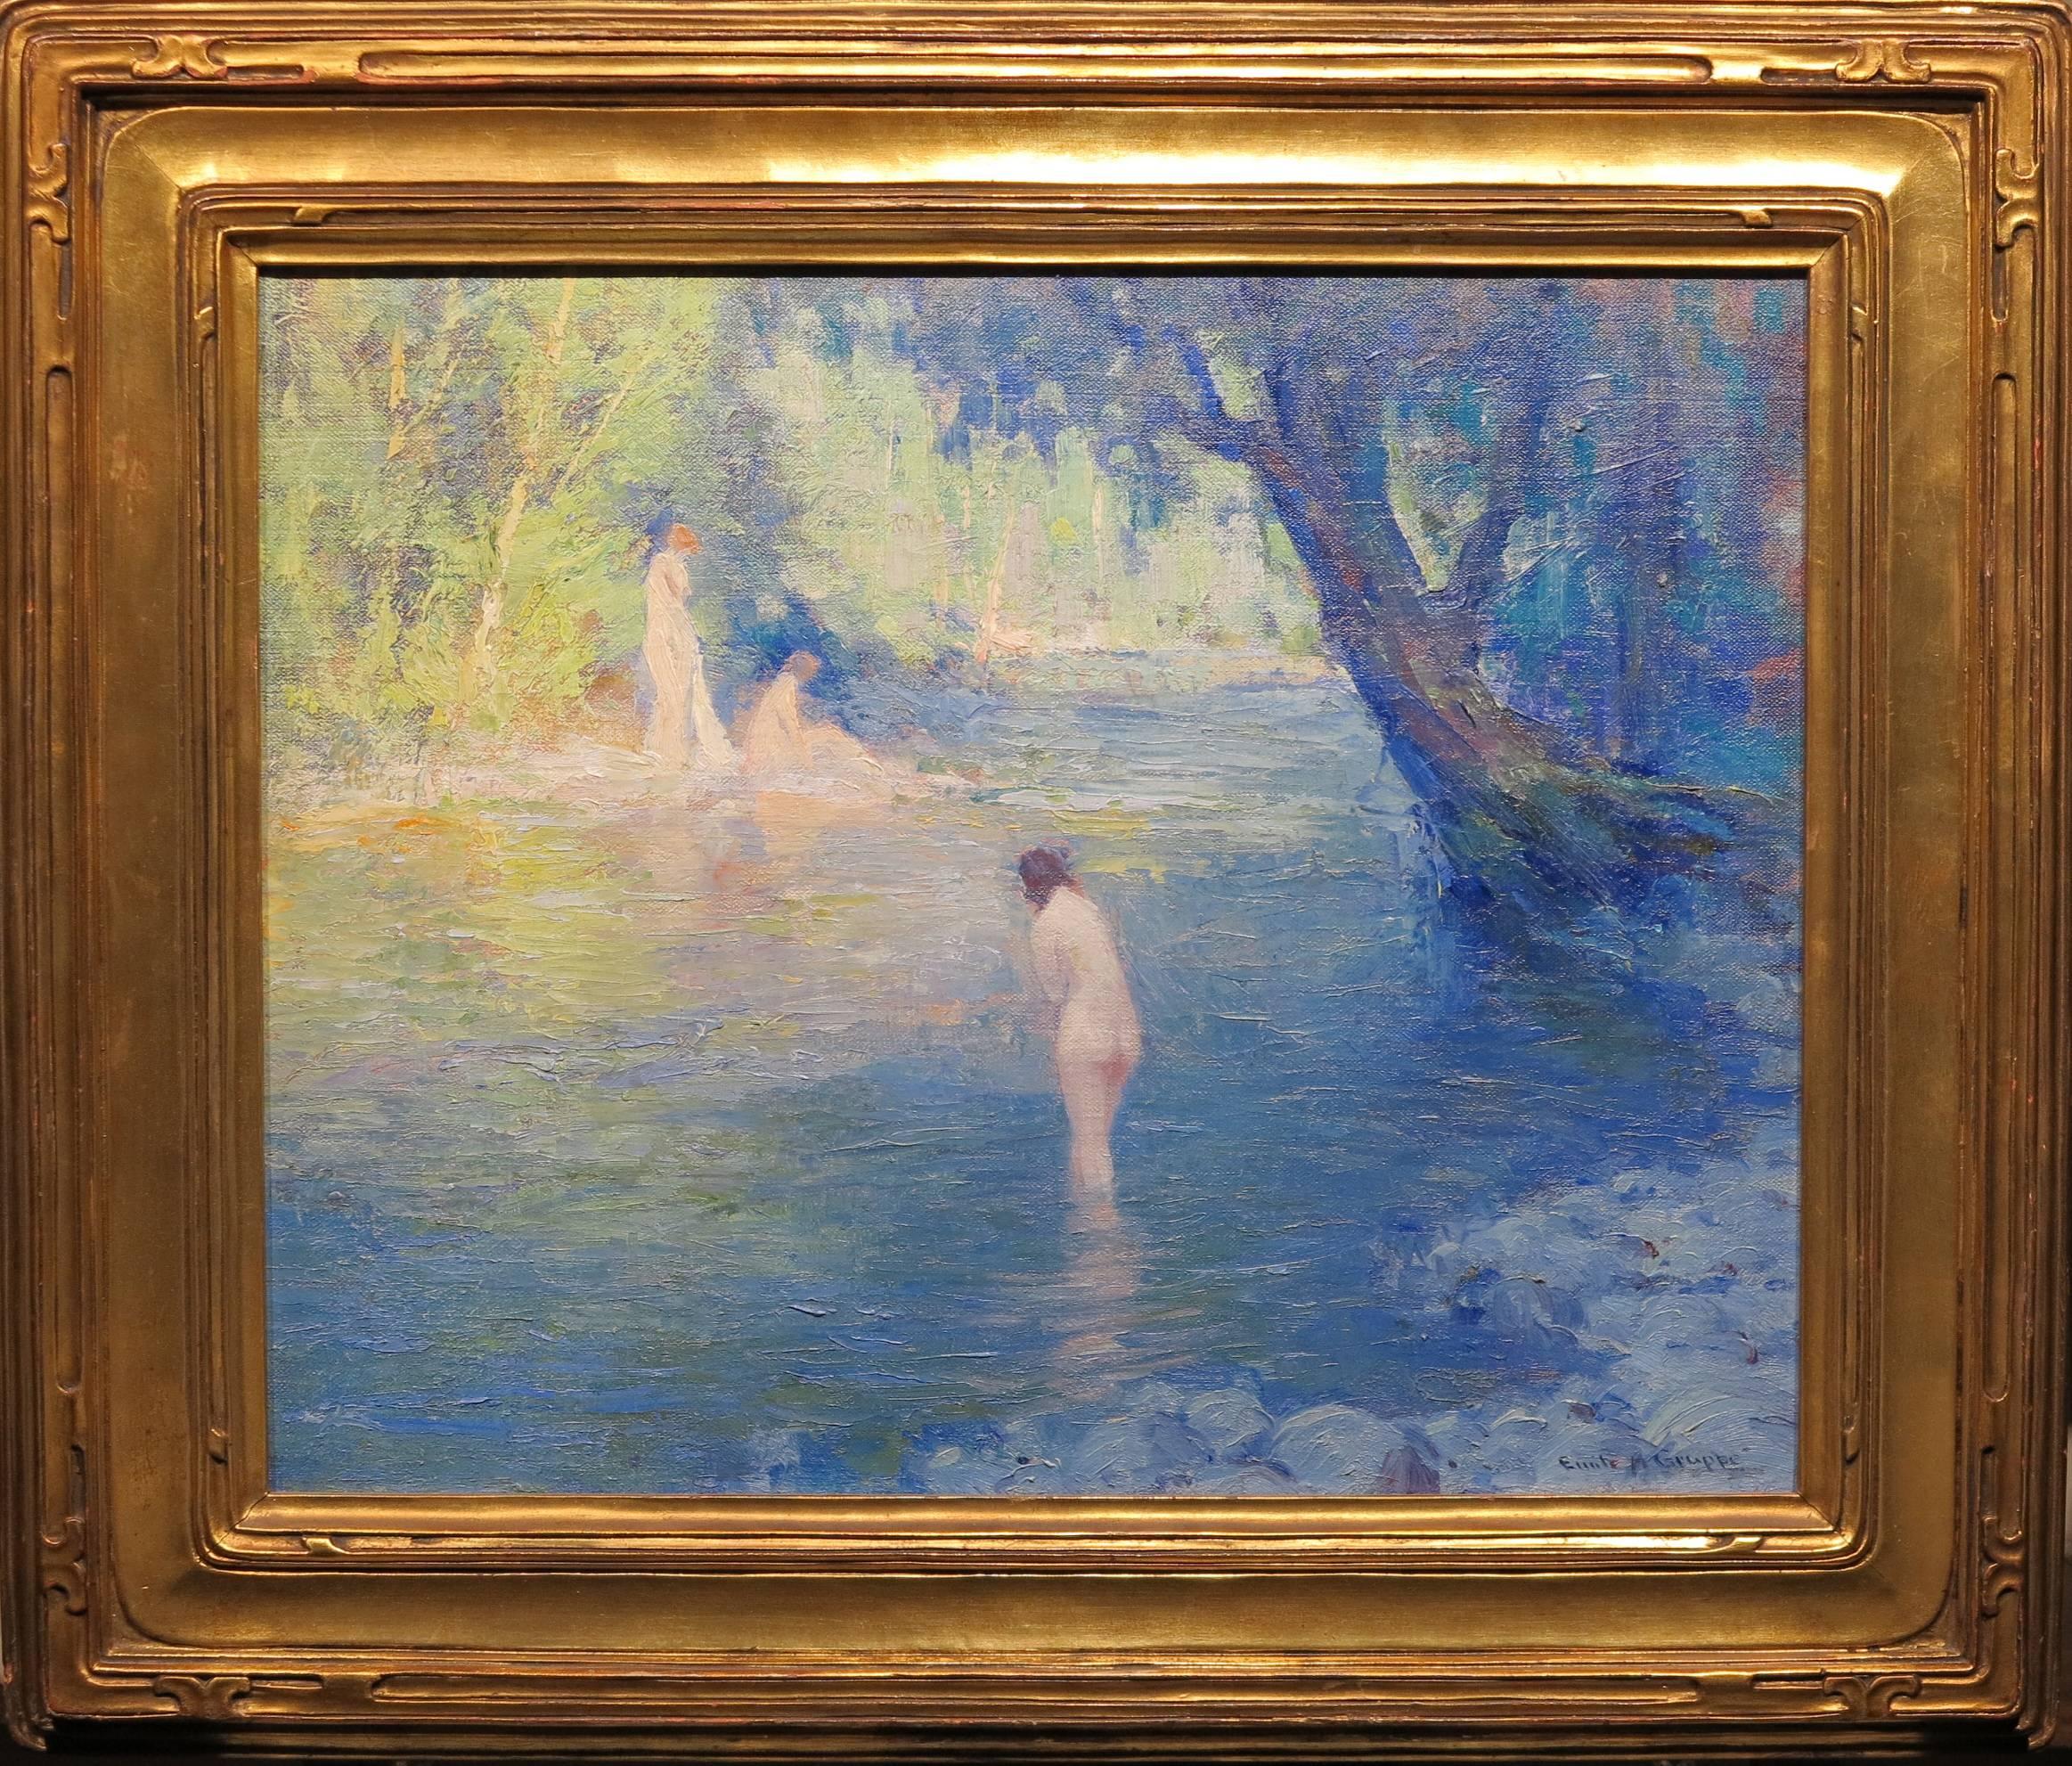 Bathers - Painting by Emile Albert Gruppe